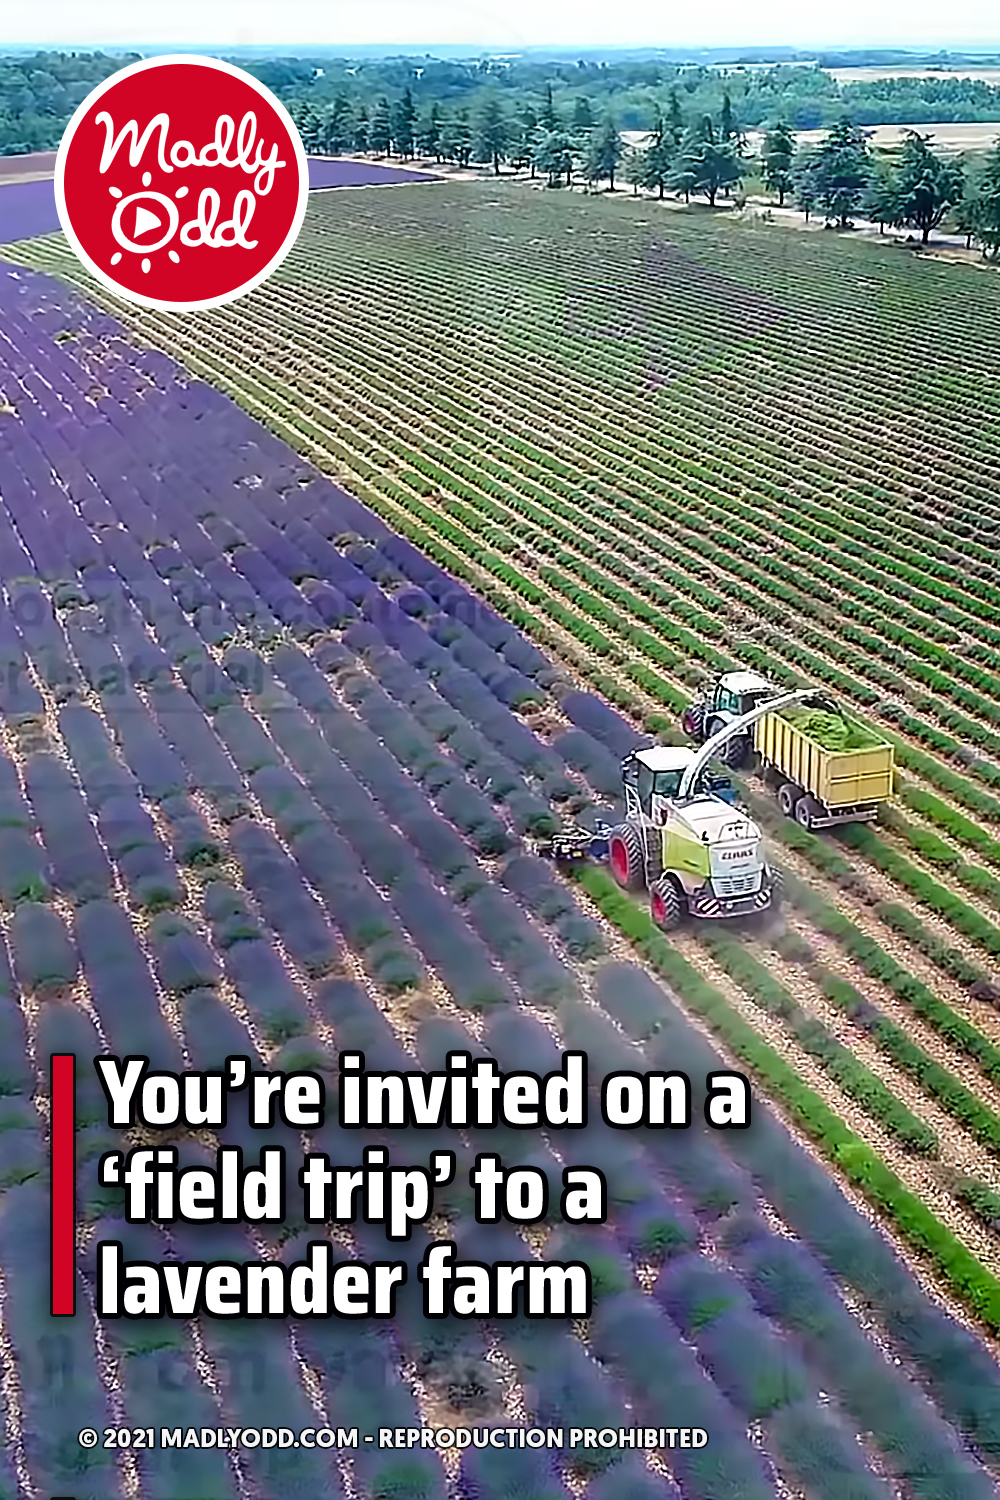 You’re invited on a ‘field trip’ to a lavender farm